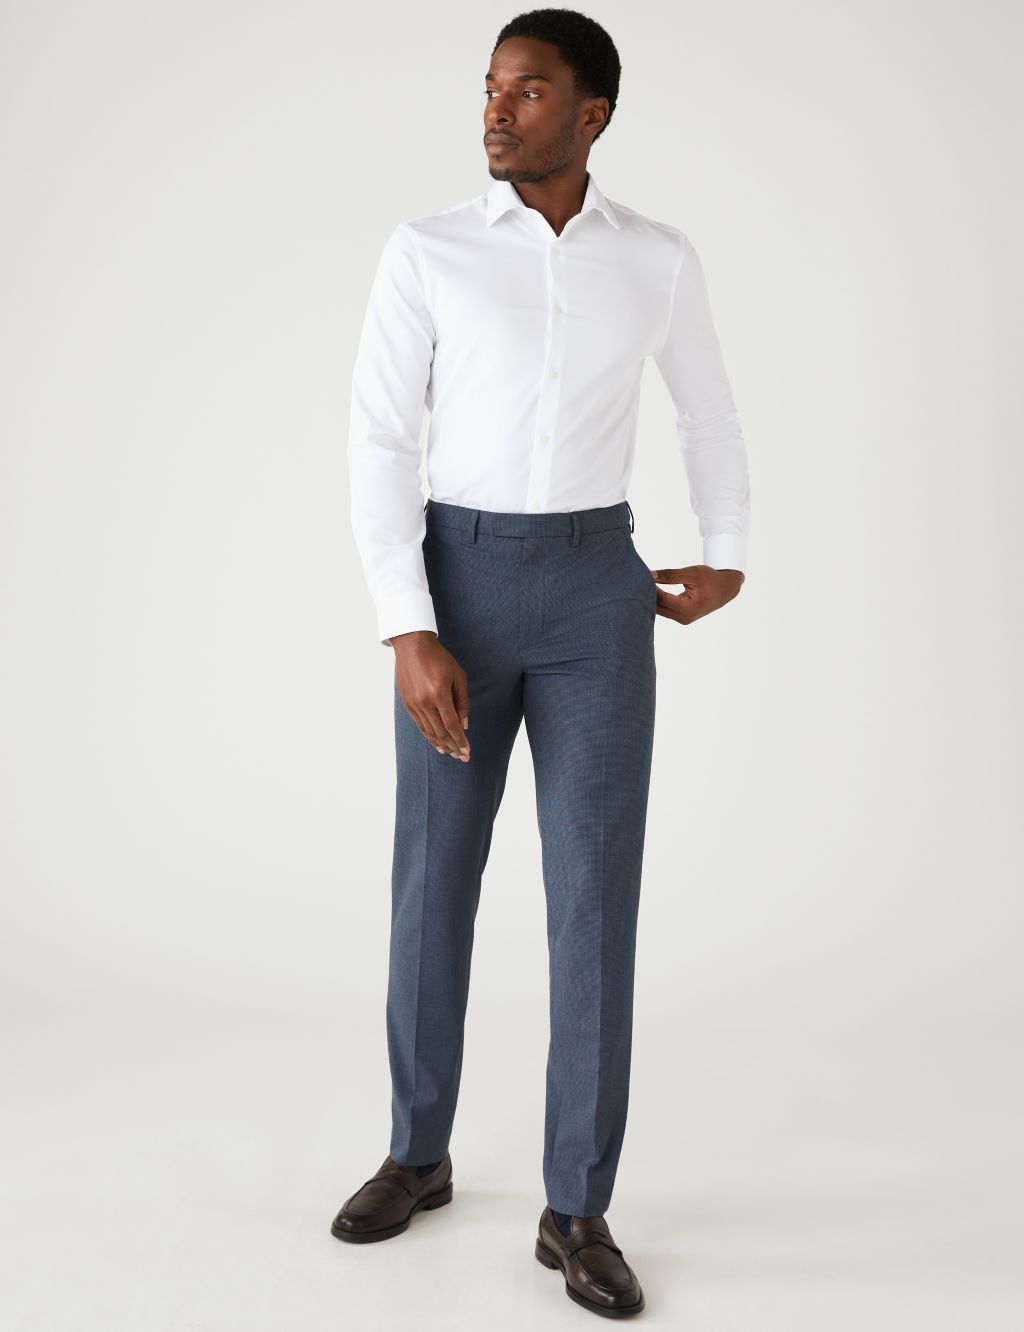 Puppytooth Stretch Trousers image 1